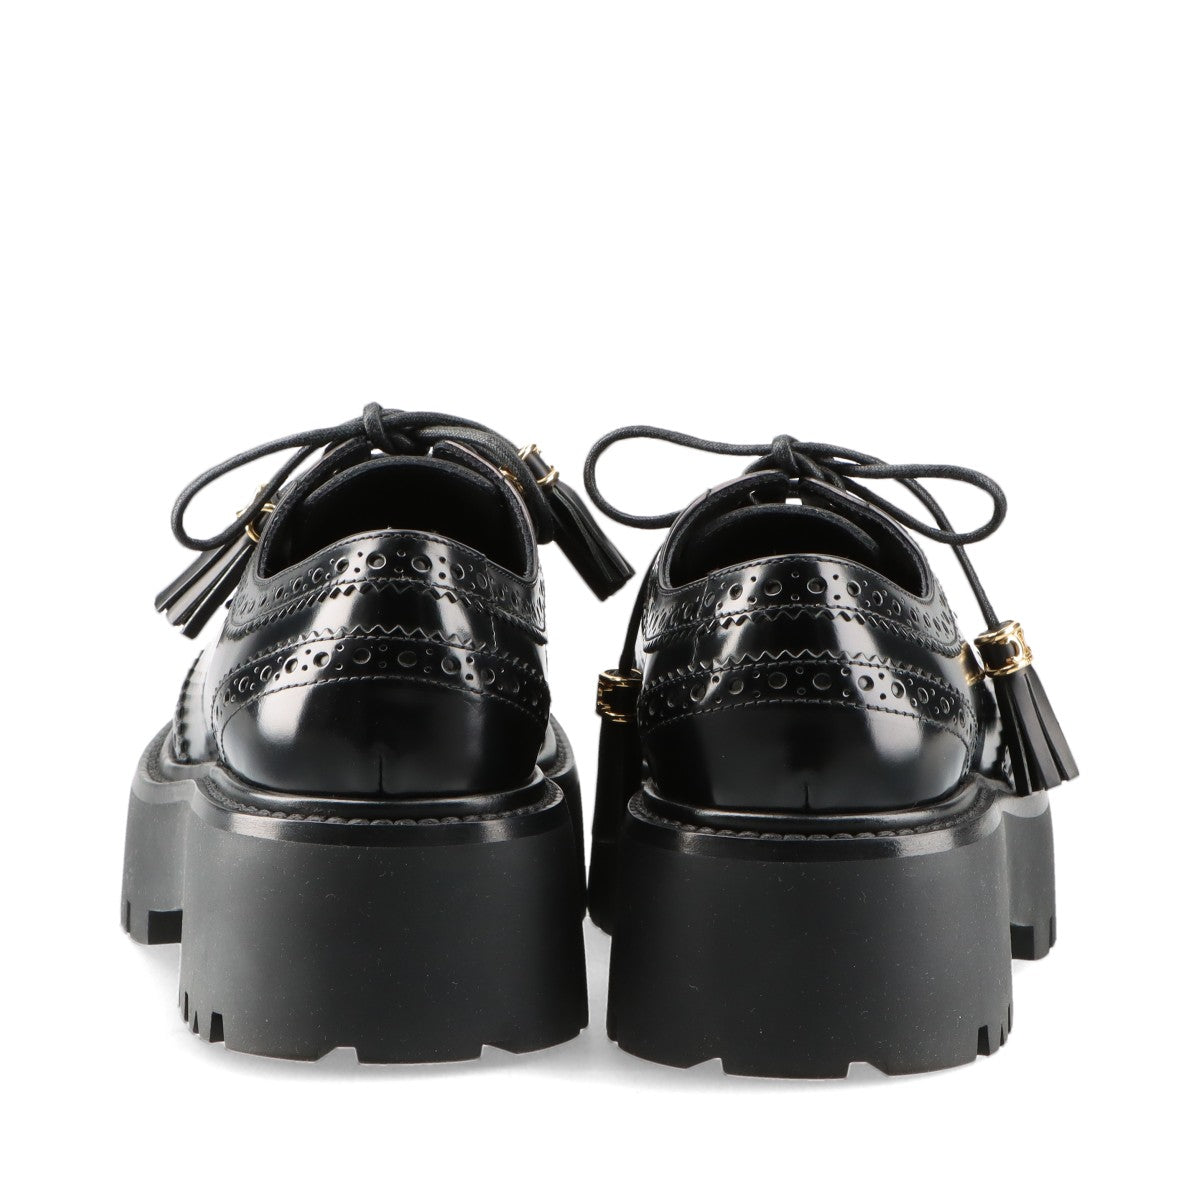 CELINE bulky 22AW Leather Dress shoes 36 Ladies' Black BE0252 Brogue derby Triomphe tassels Thick bottom There is a replacement string